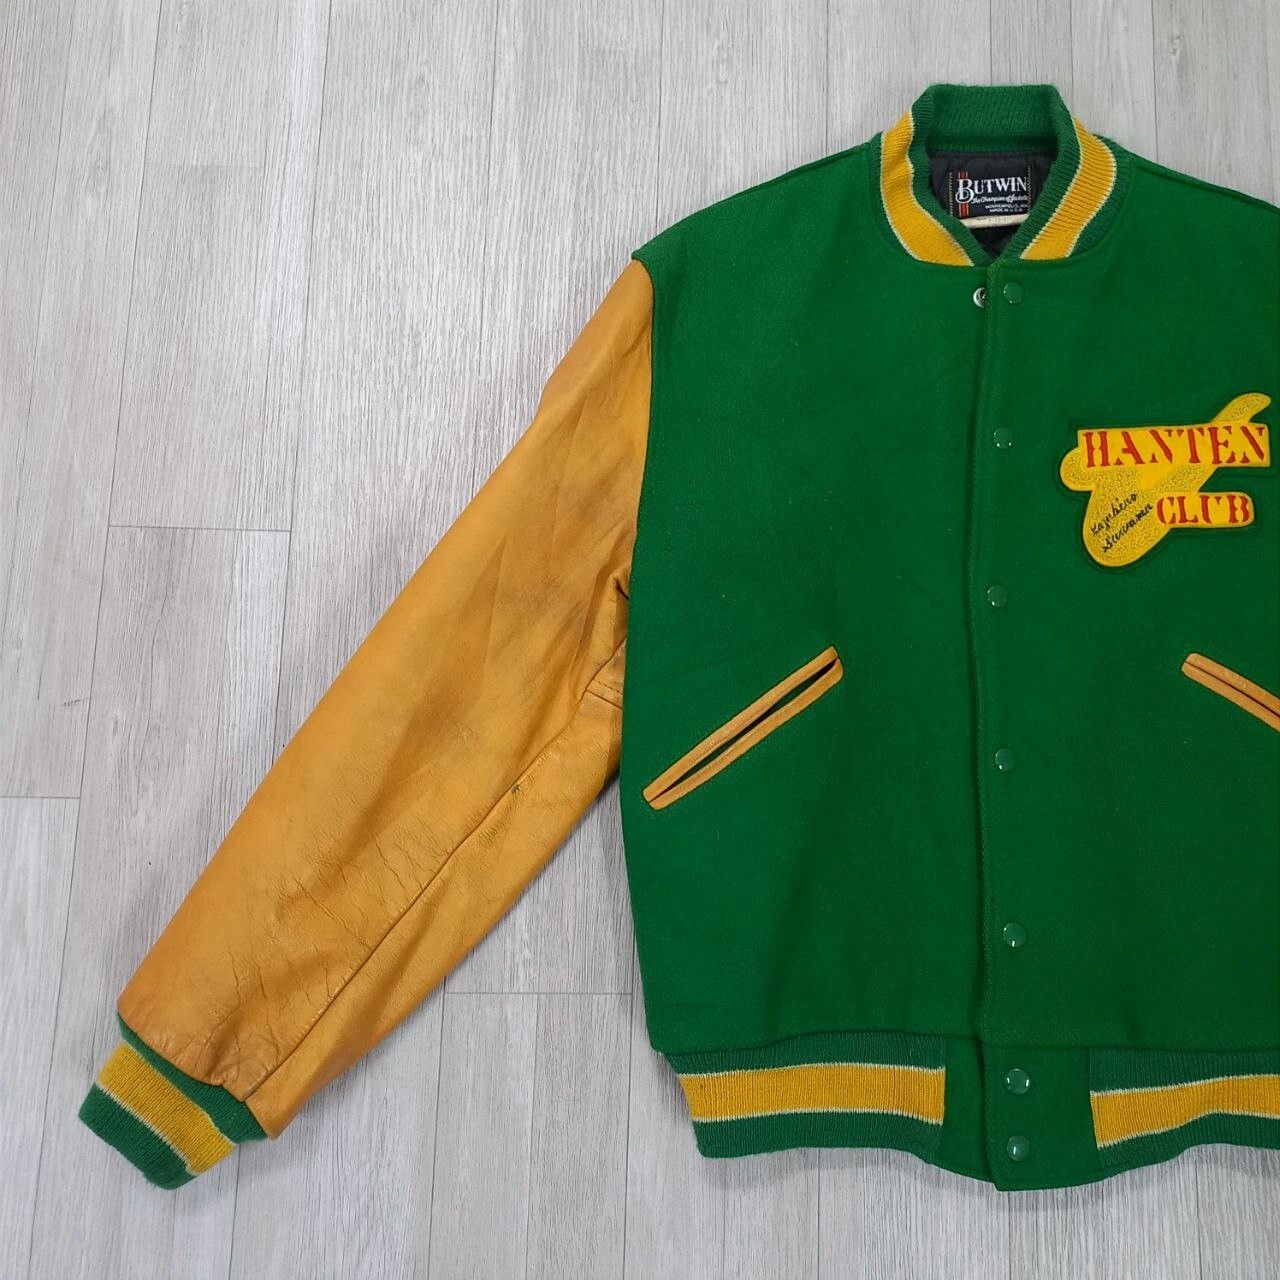 Union Made - HANTEN CLUB 1984 by BUTWIN USA Wool Leather Varsity Jacket - 9